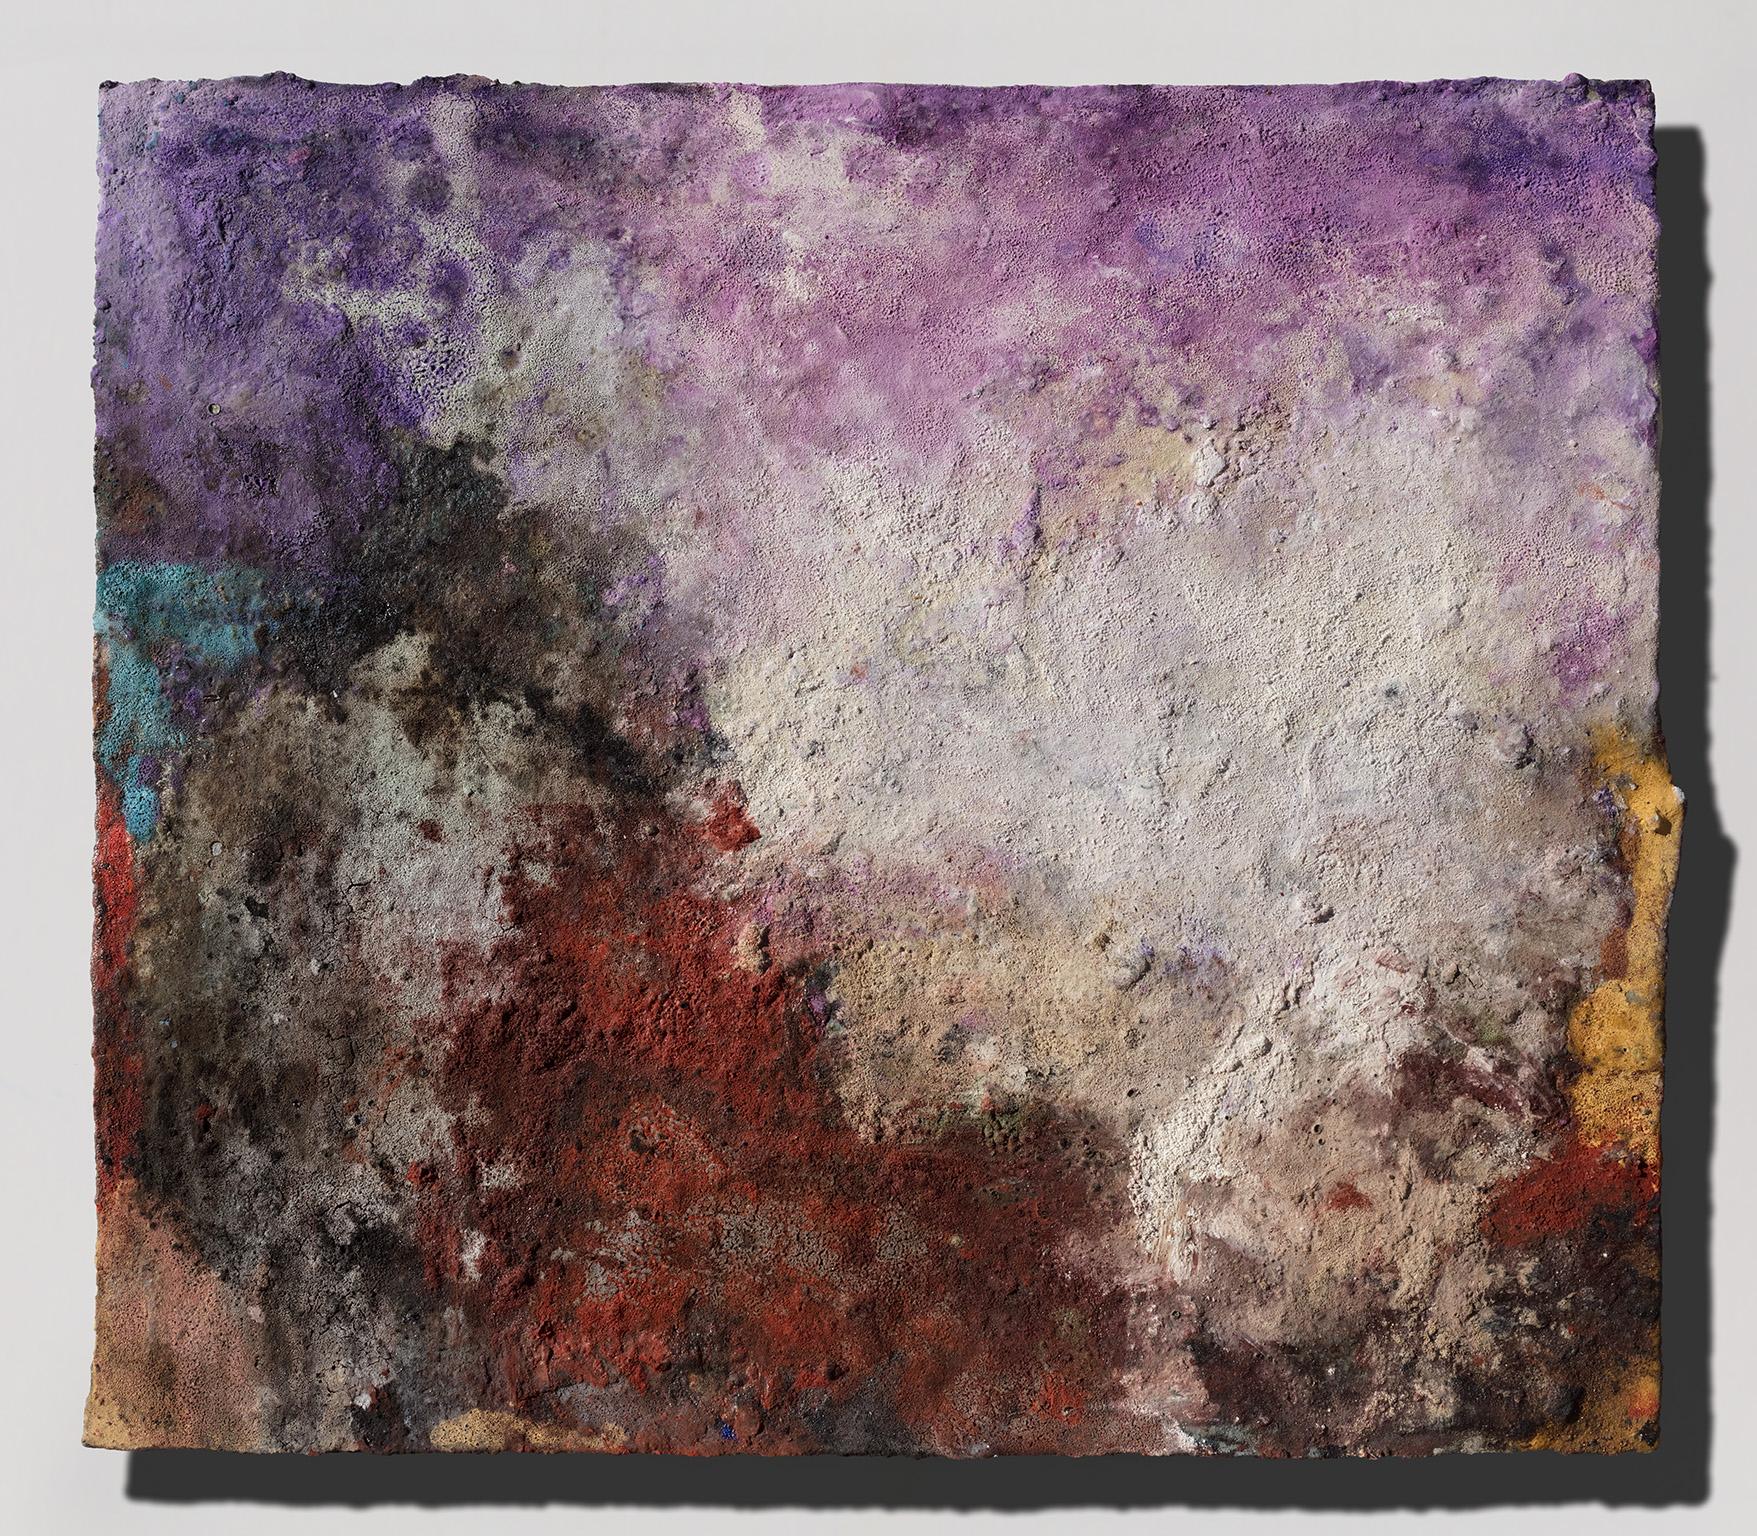 Terra Bruciata (Scorched Earth) - Small Abstract Purple and Red Painting - Mixed Media Art by Orazio De Gennaro